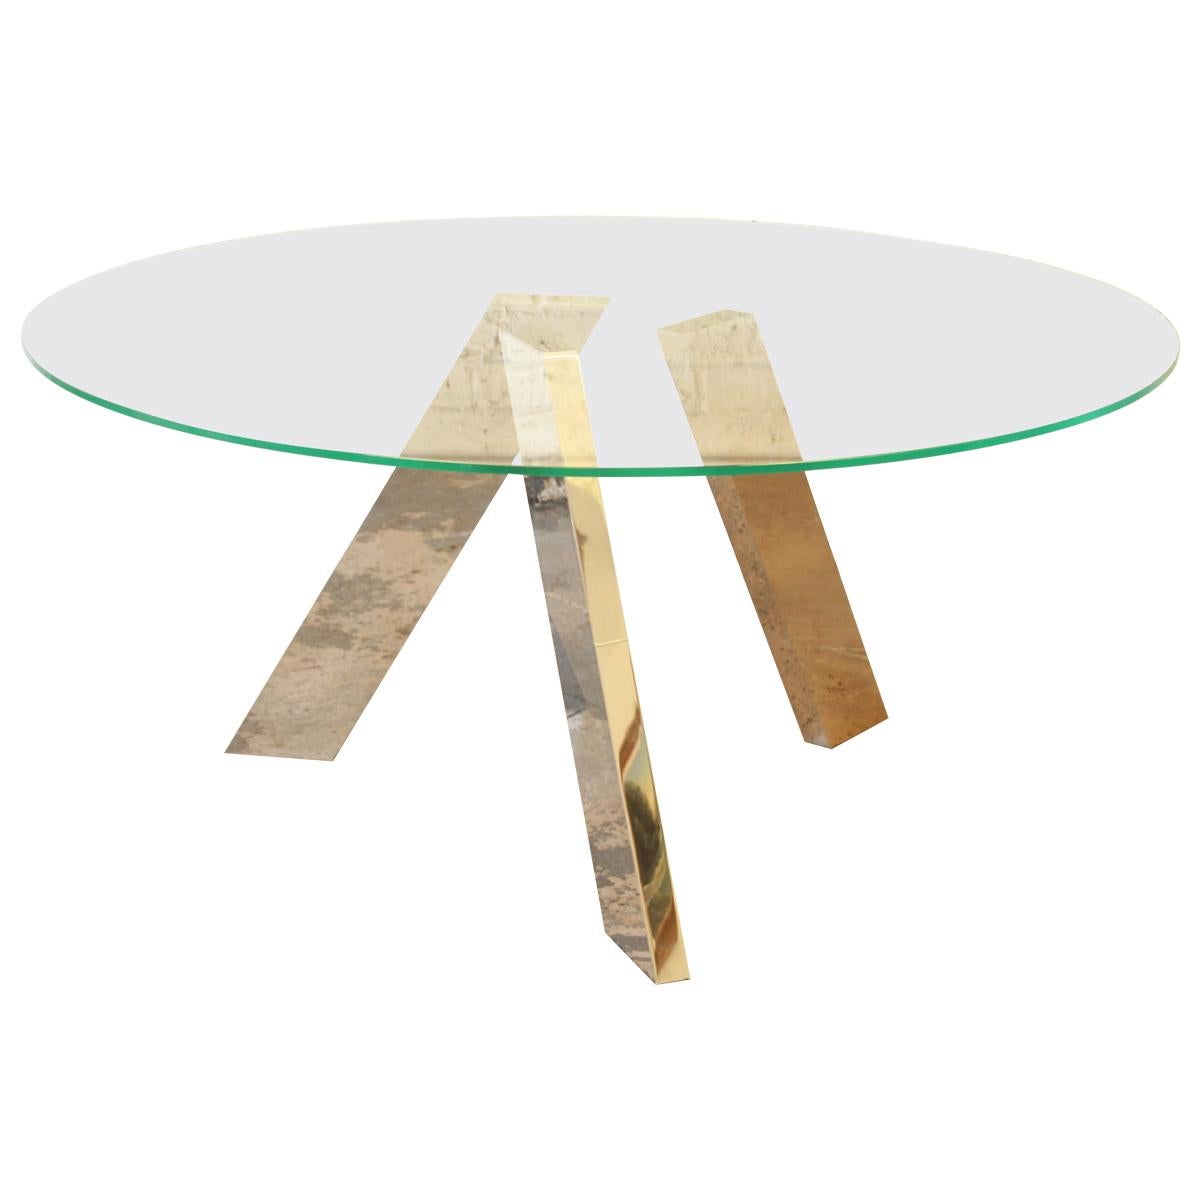 Roche Bobois Modern Sculptural Dining Table with Mirrored Chrome Legs